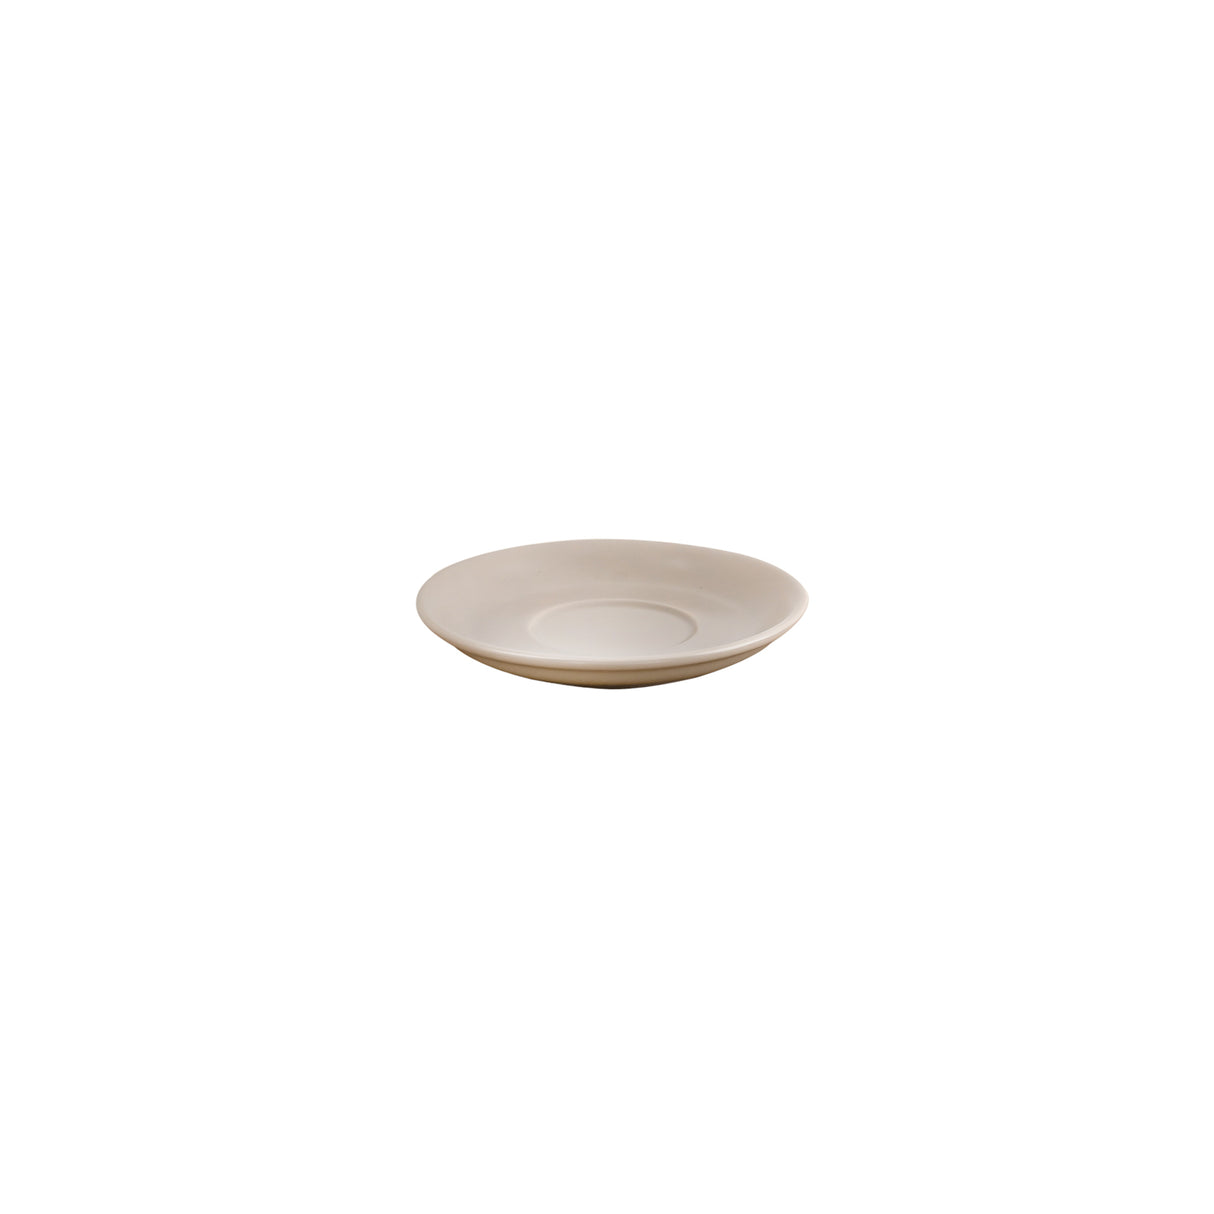 Megaccino saucer - 150Mm, Stone: Pack of 6